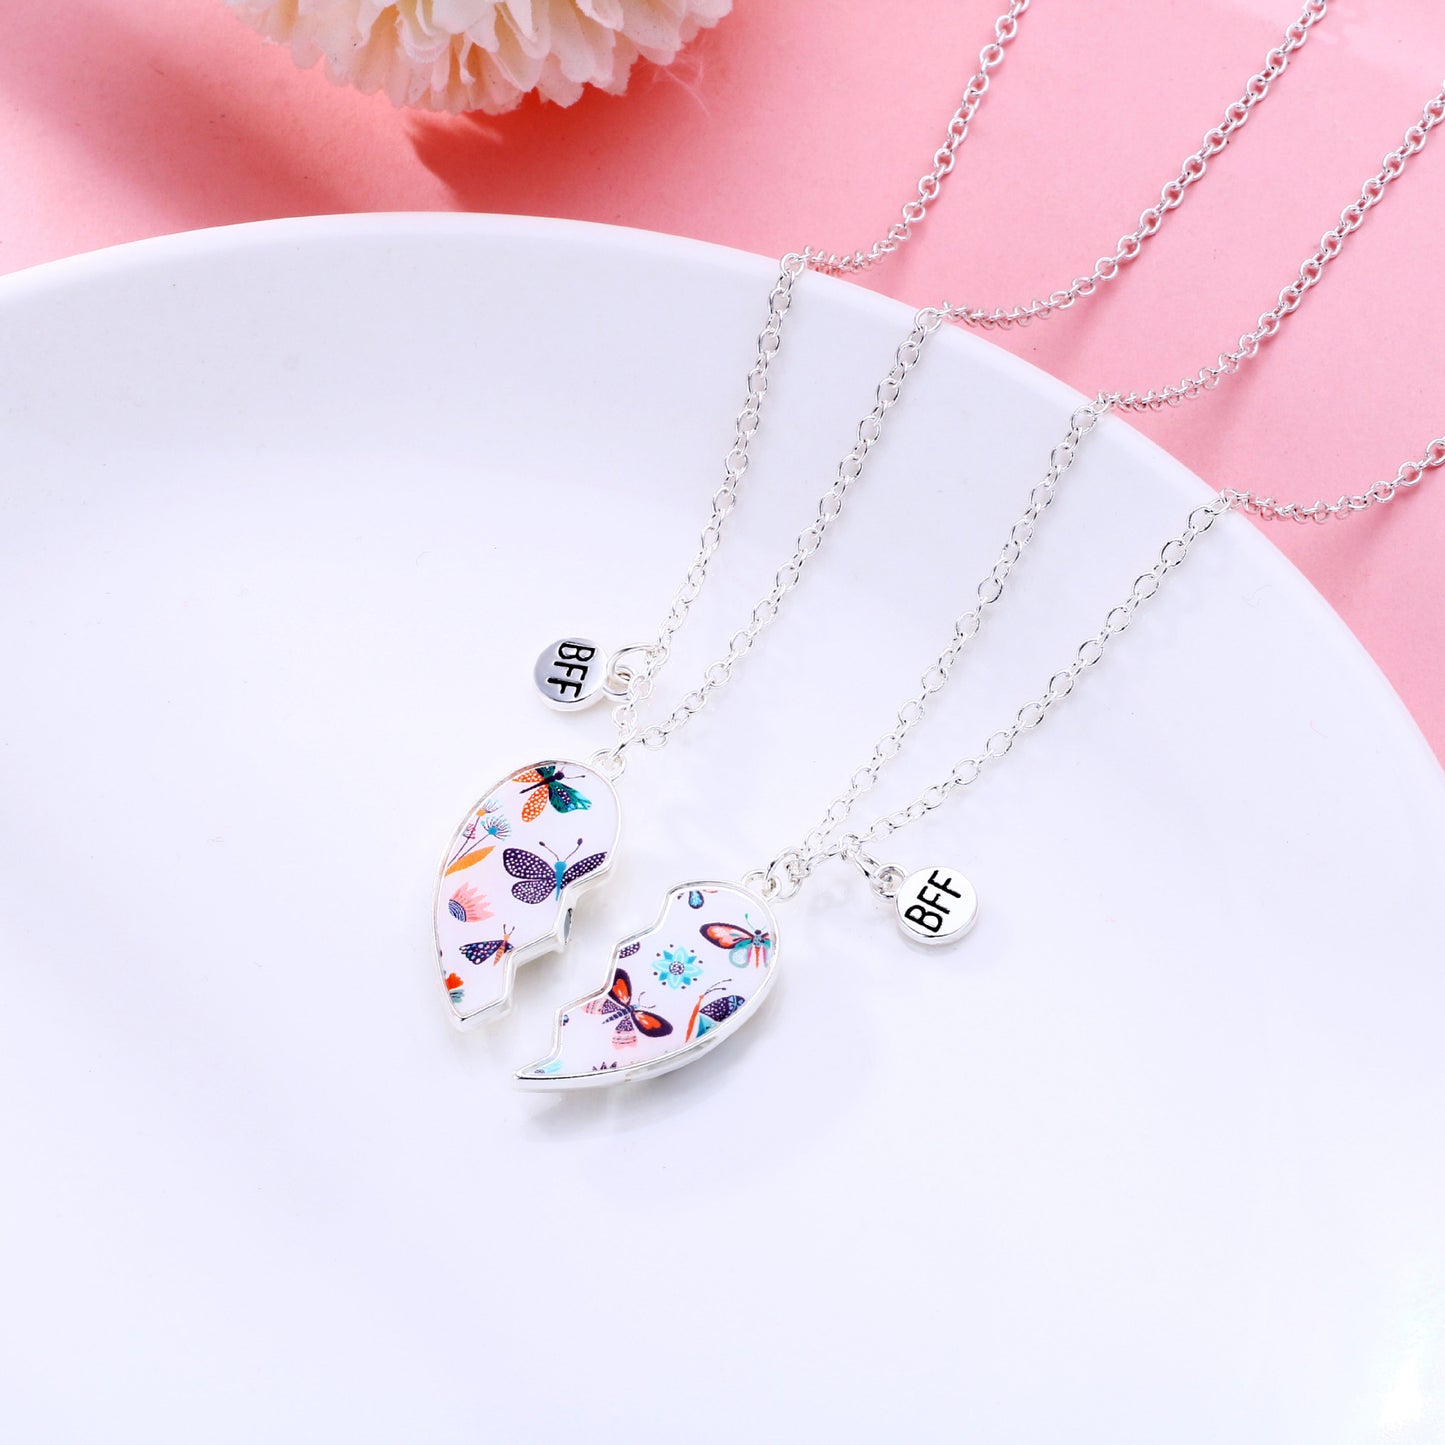 Magnetic Hearts Bff Necklaces Birthday Gift for Best Friends